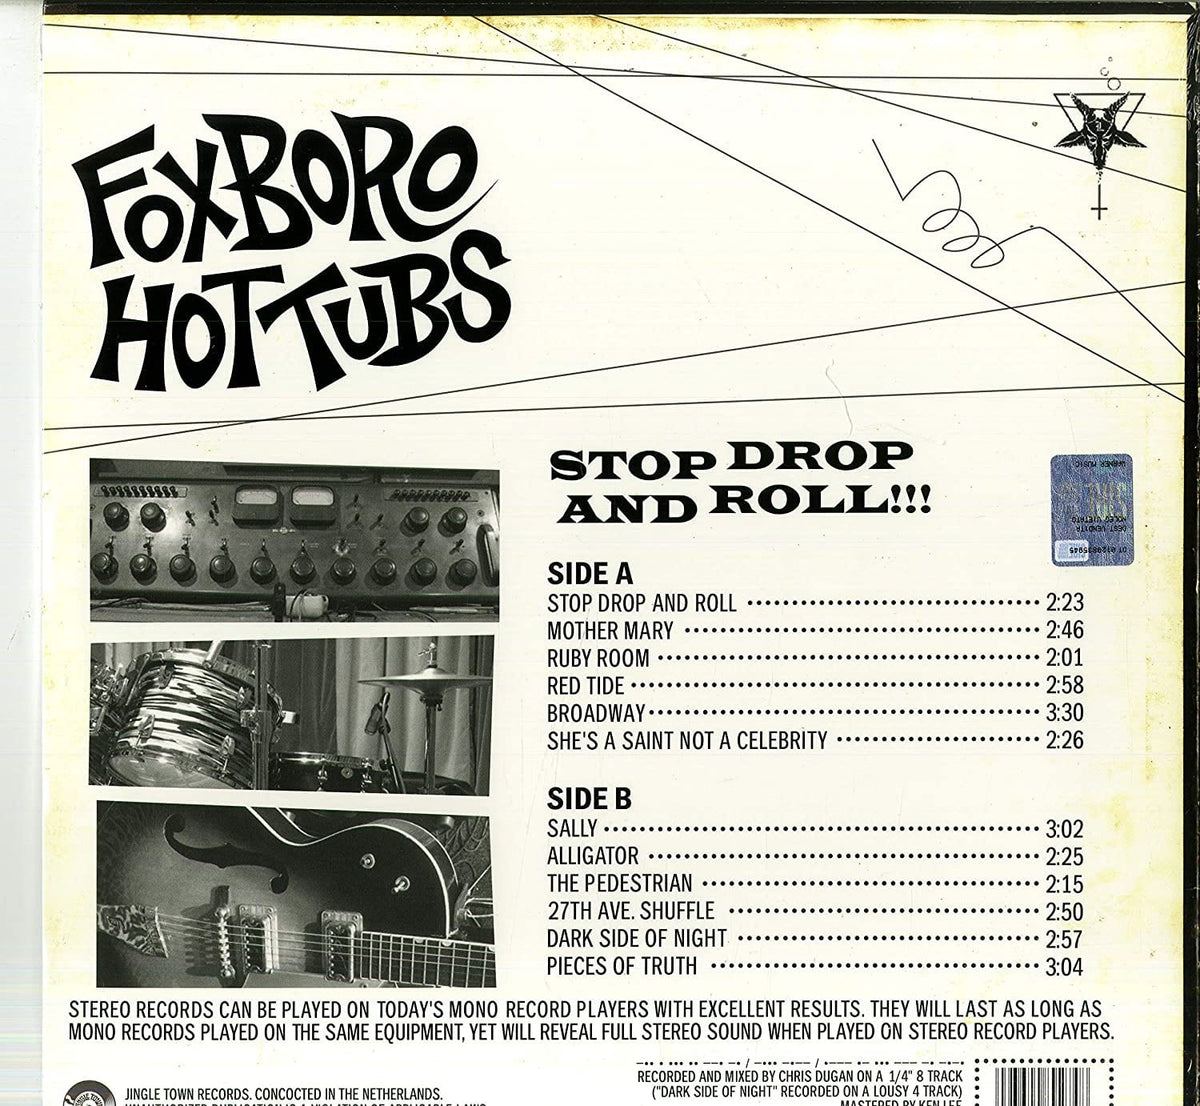 STOP, DROP AND ROLL - FOXBORO HOTTUBS